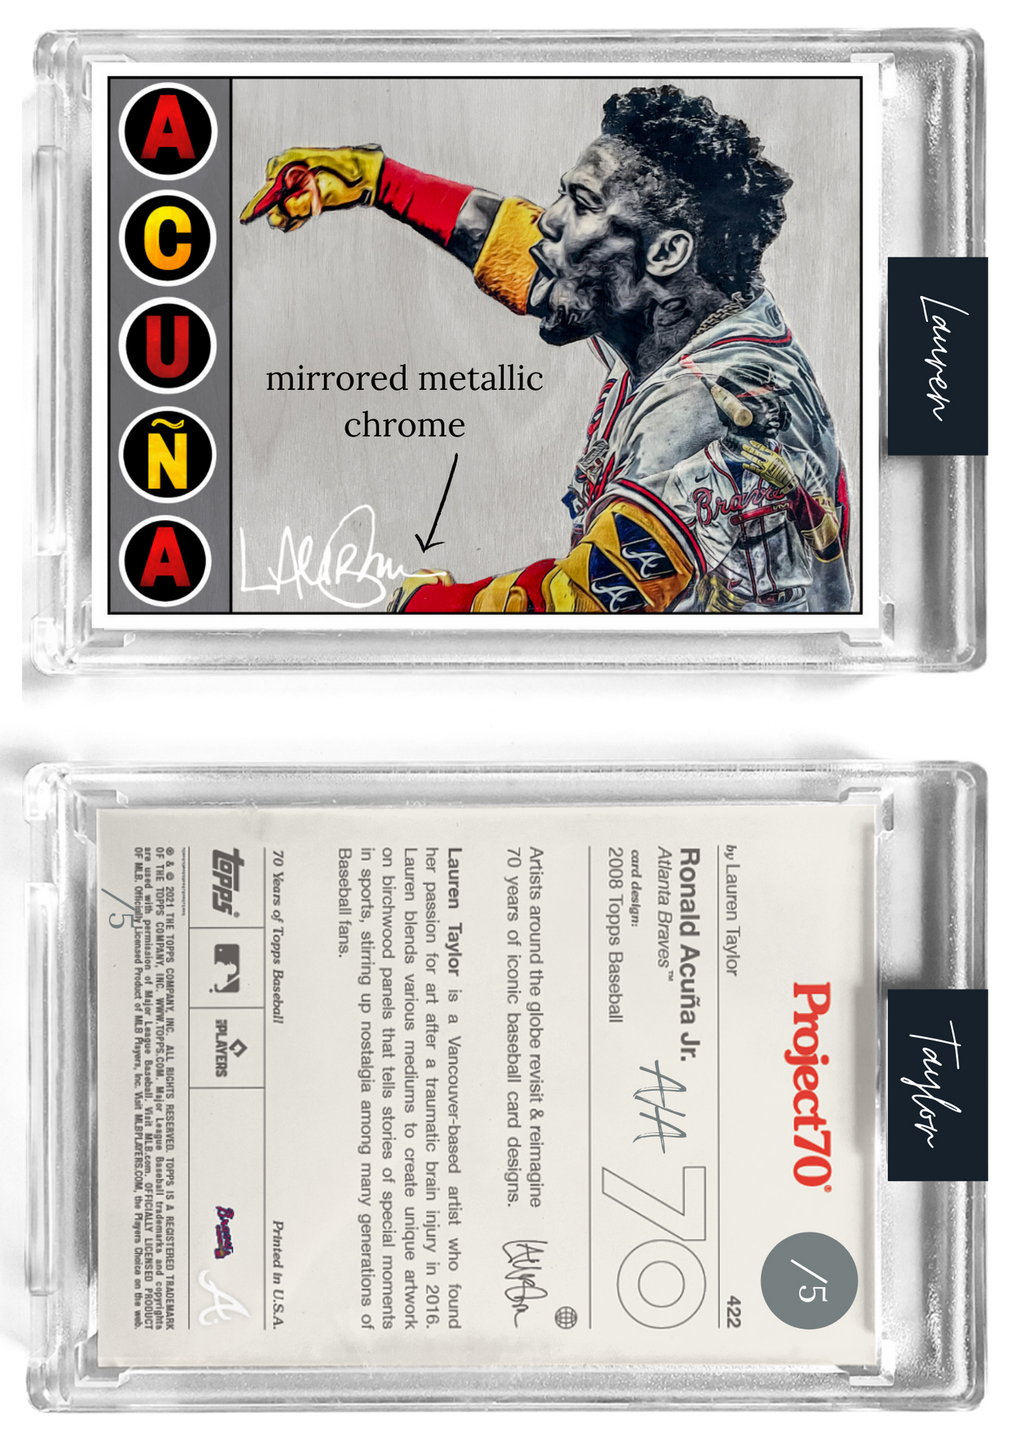 /5 Silver Chrome Artist Signature - Topps Project 70 130pt card #422 by Lauren Taylor - Ronald Acuña Jr.